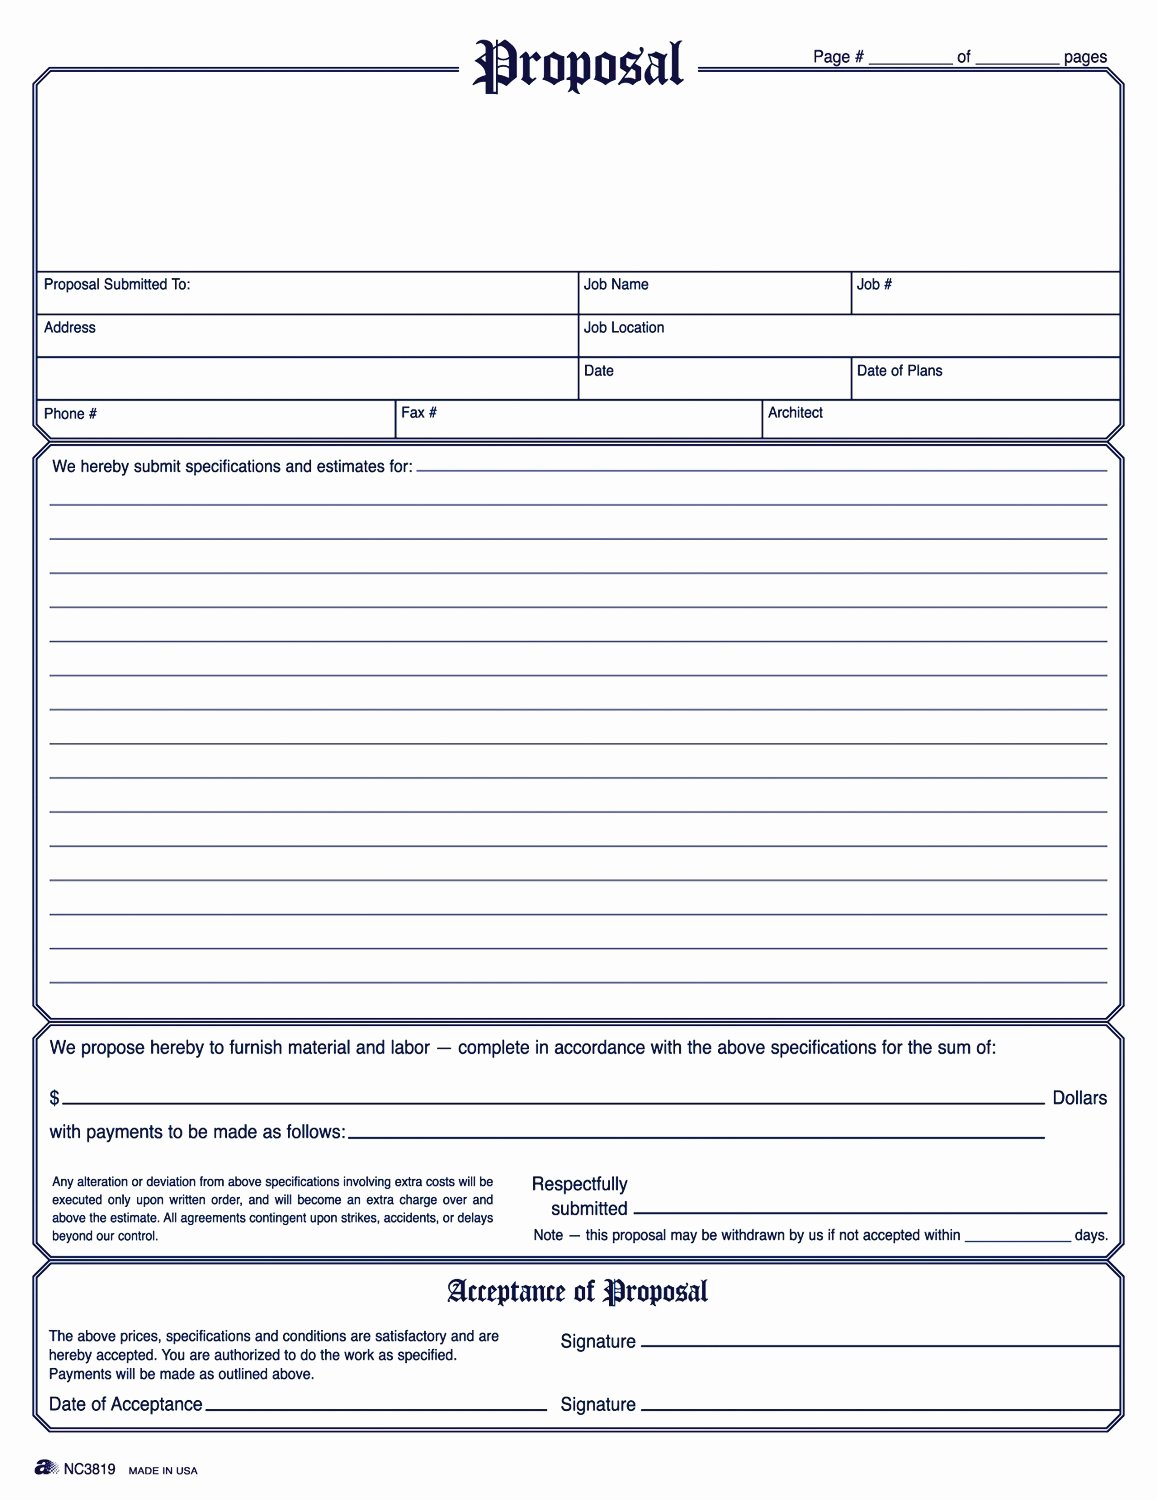 Free Printable Contractor Proposal forms Awesome so Cold Breaking Benjarmin Web Frompo 1